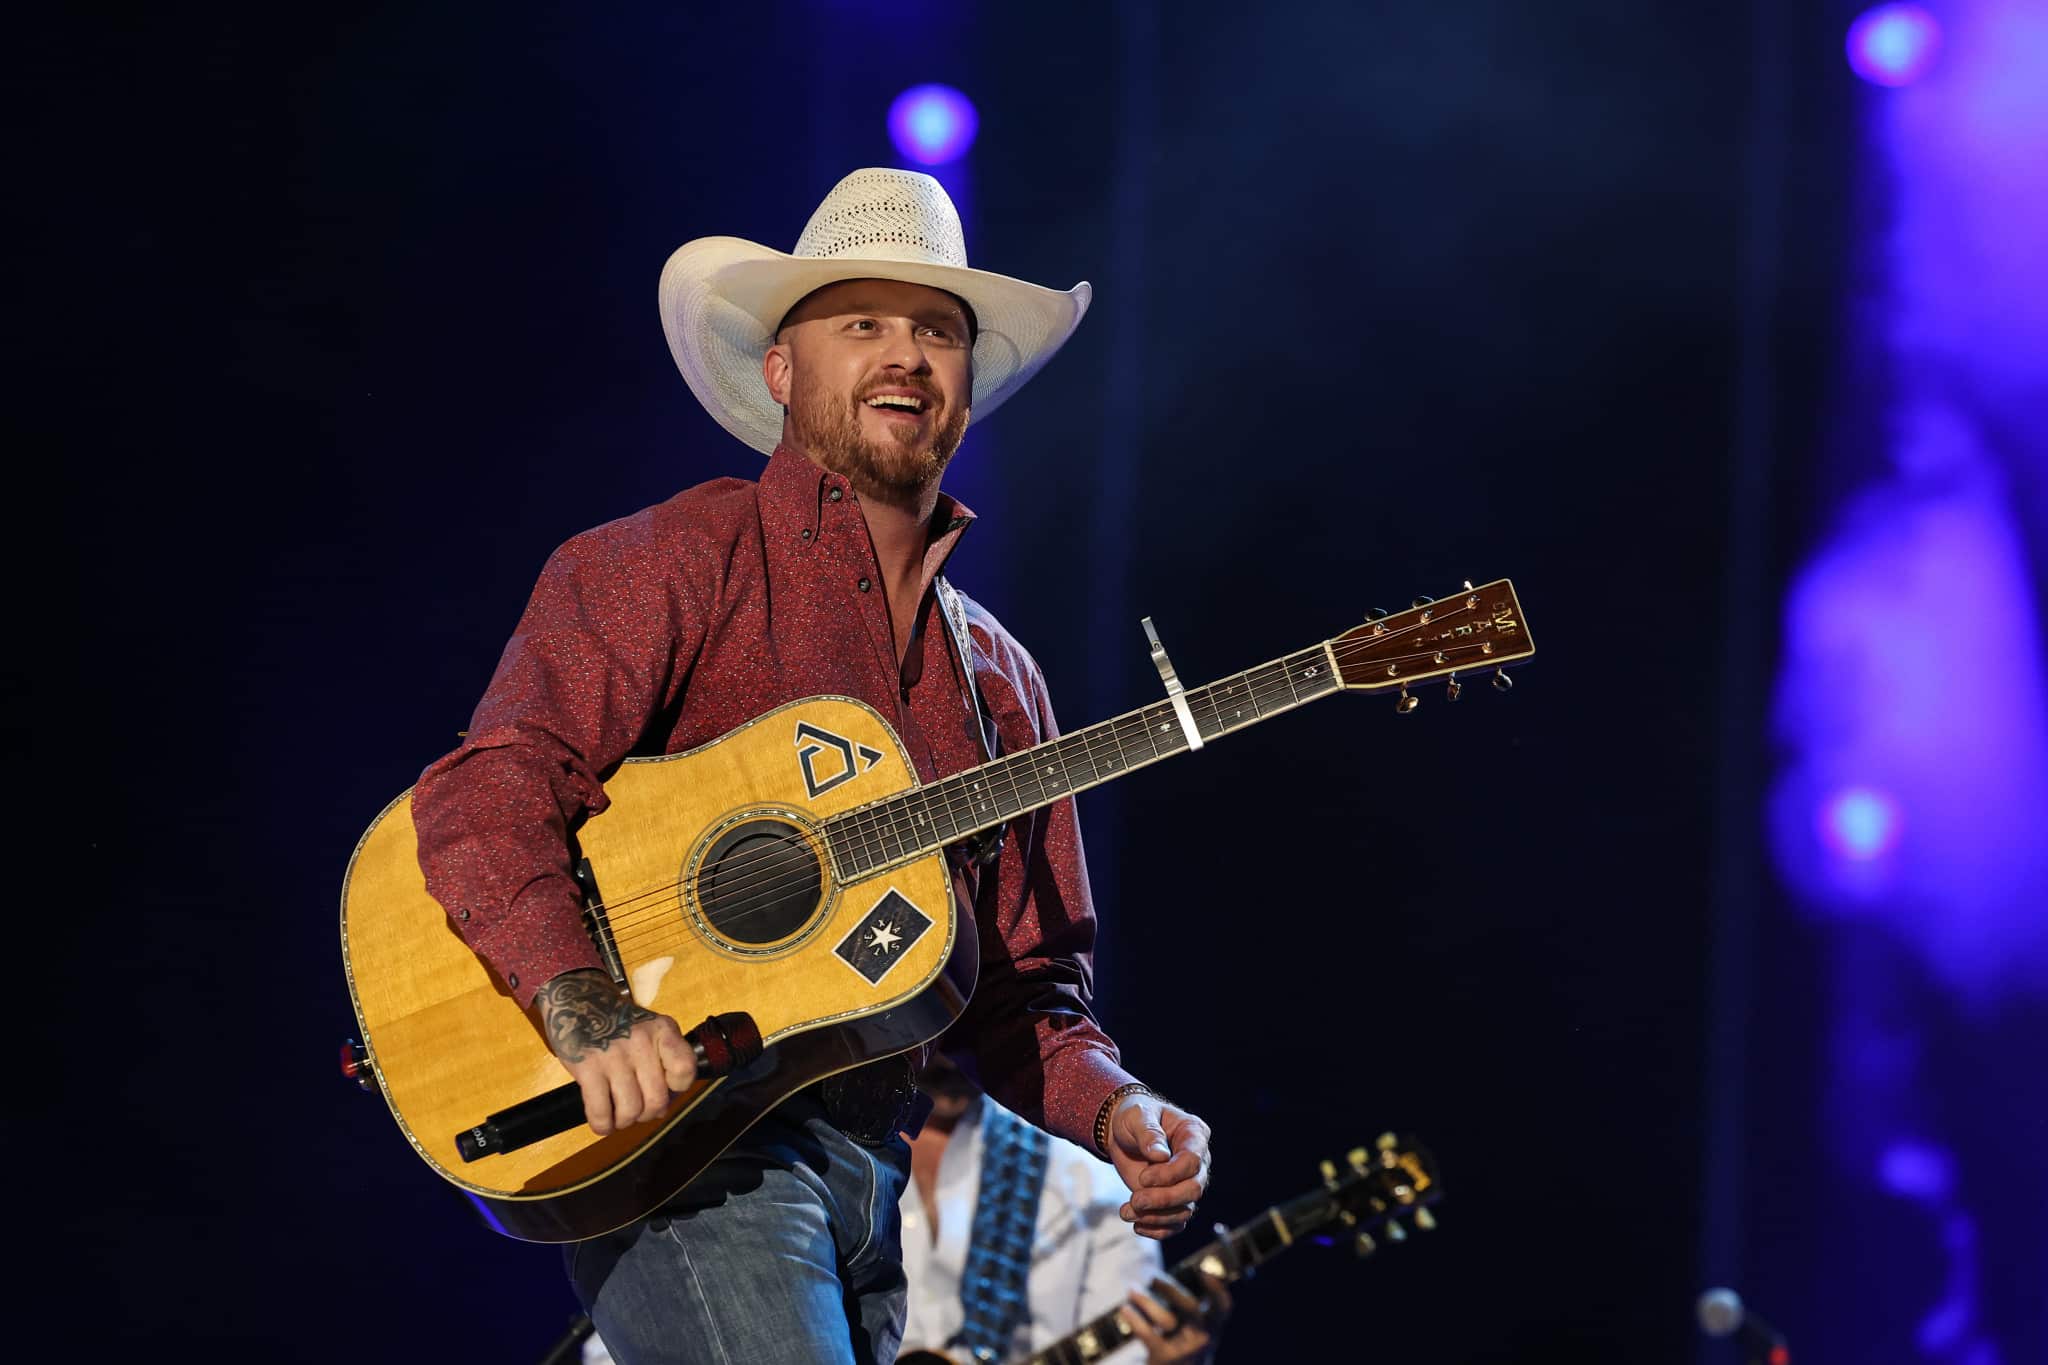 Cody Johnson was born and raised in Texas